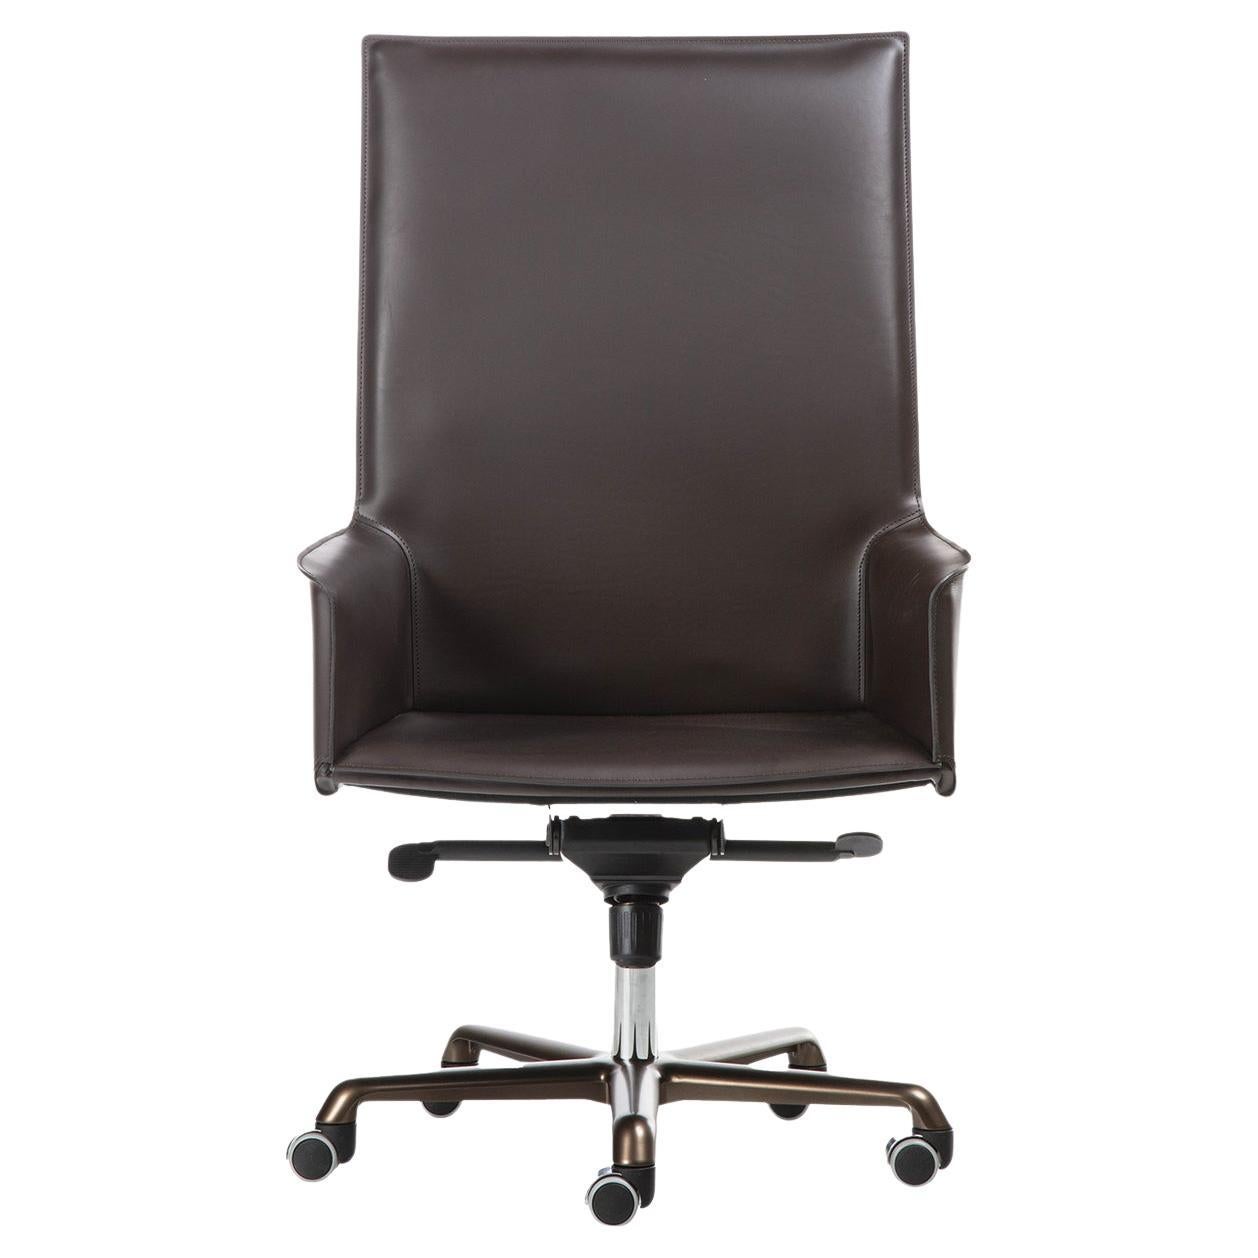 Pasqualina Swivel President Chair by Grassi&Bianchi and RedCreative For Sale